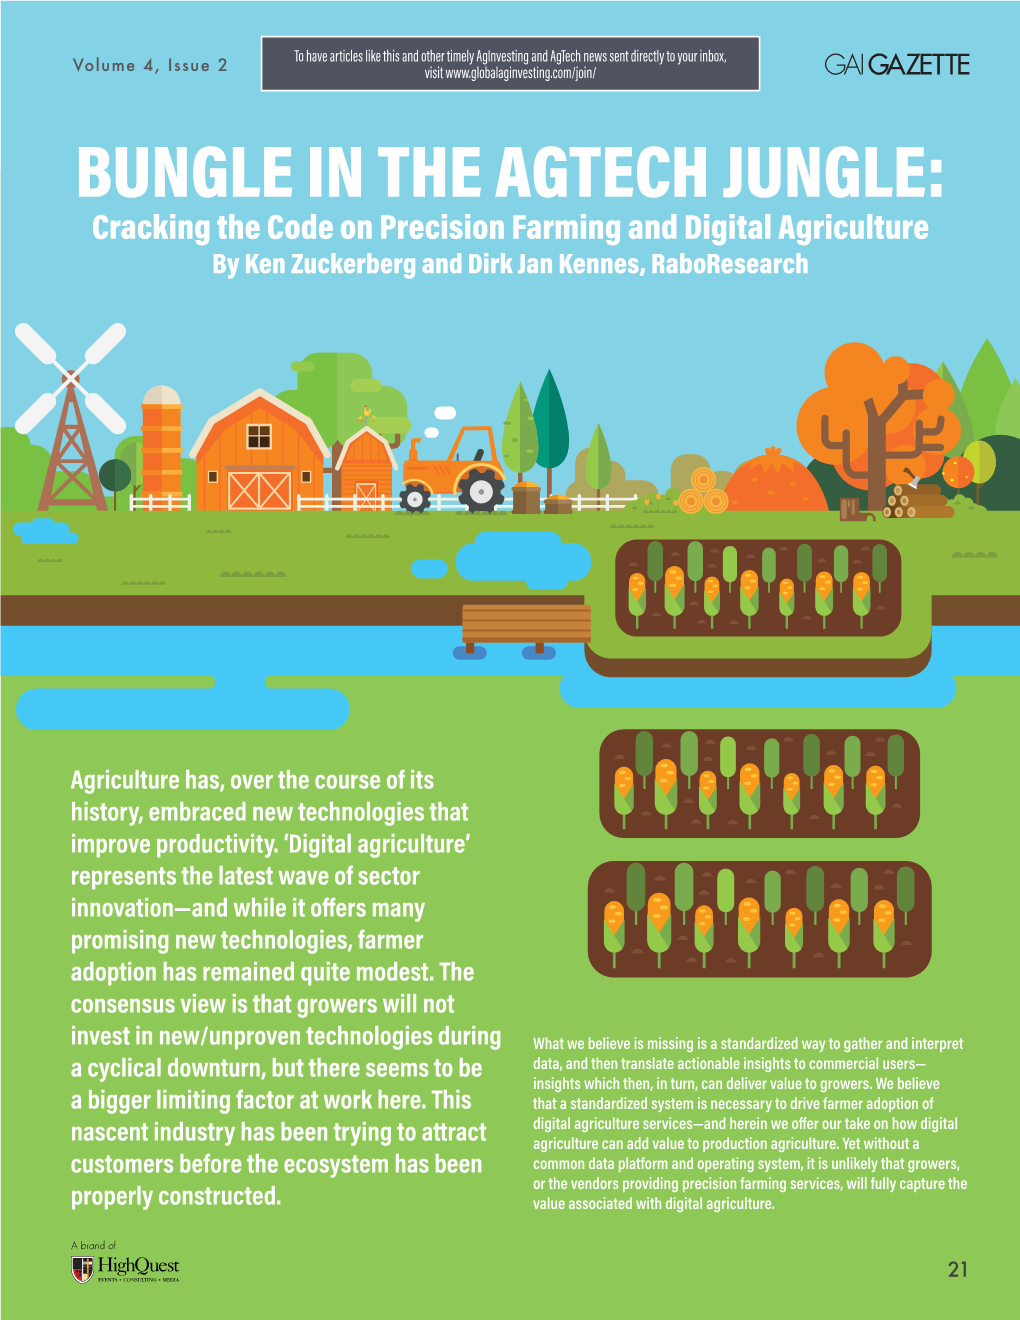 BUNGLE in the AGTECH JUNGLE: Cracking the Code on Precision Farming and Digital Agriculture by Ken Zuckerberg and Dirk Jan Kennes, Raboresearch